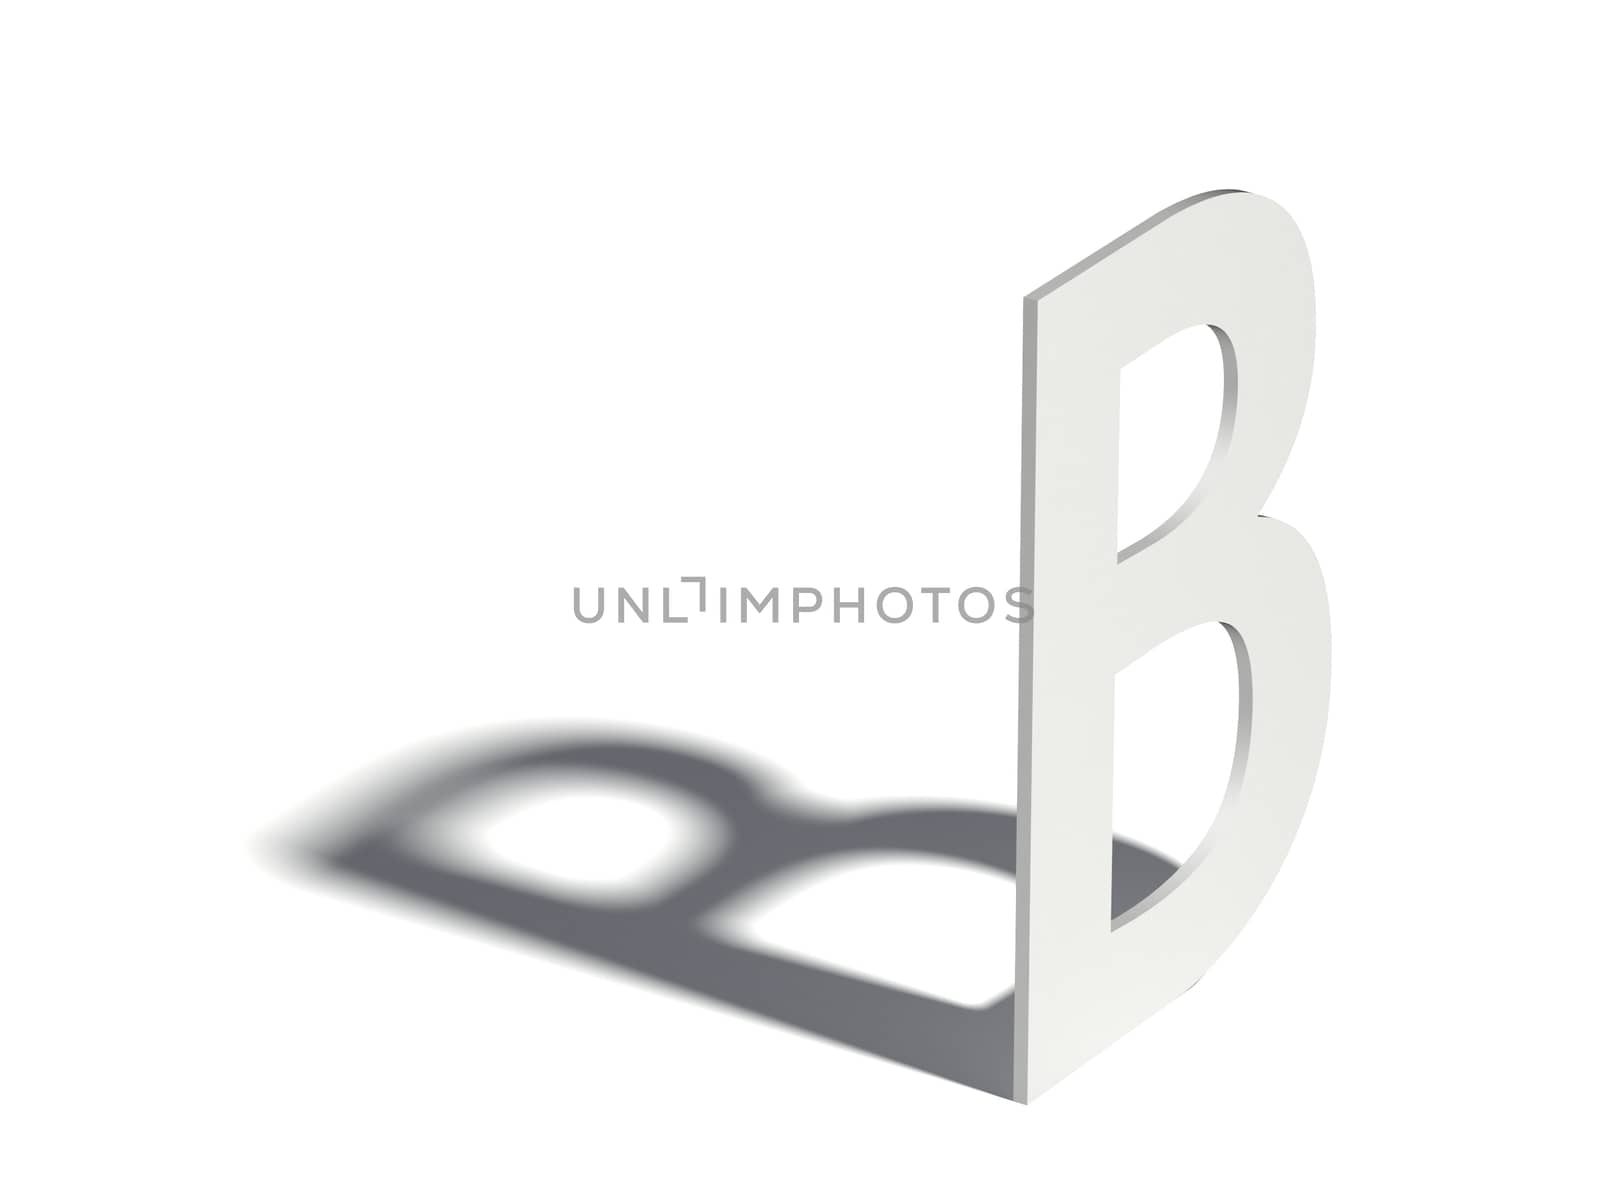 Drop shadow font. Letter B. 3D render illustration isolated on white background